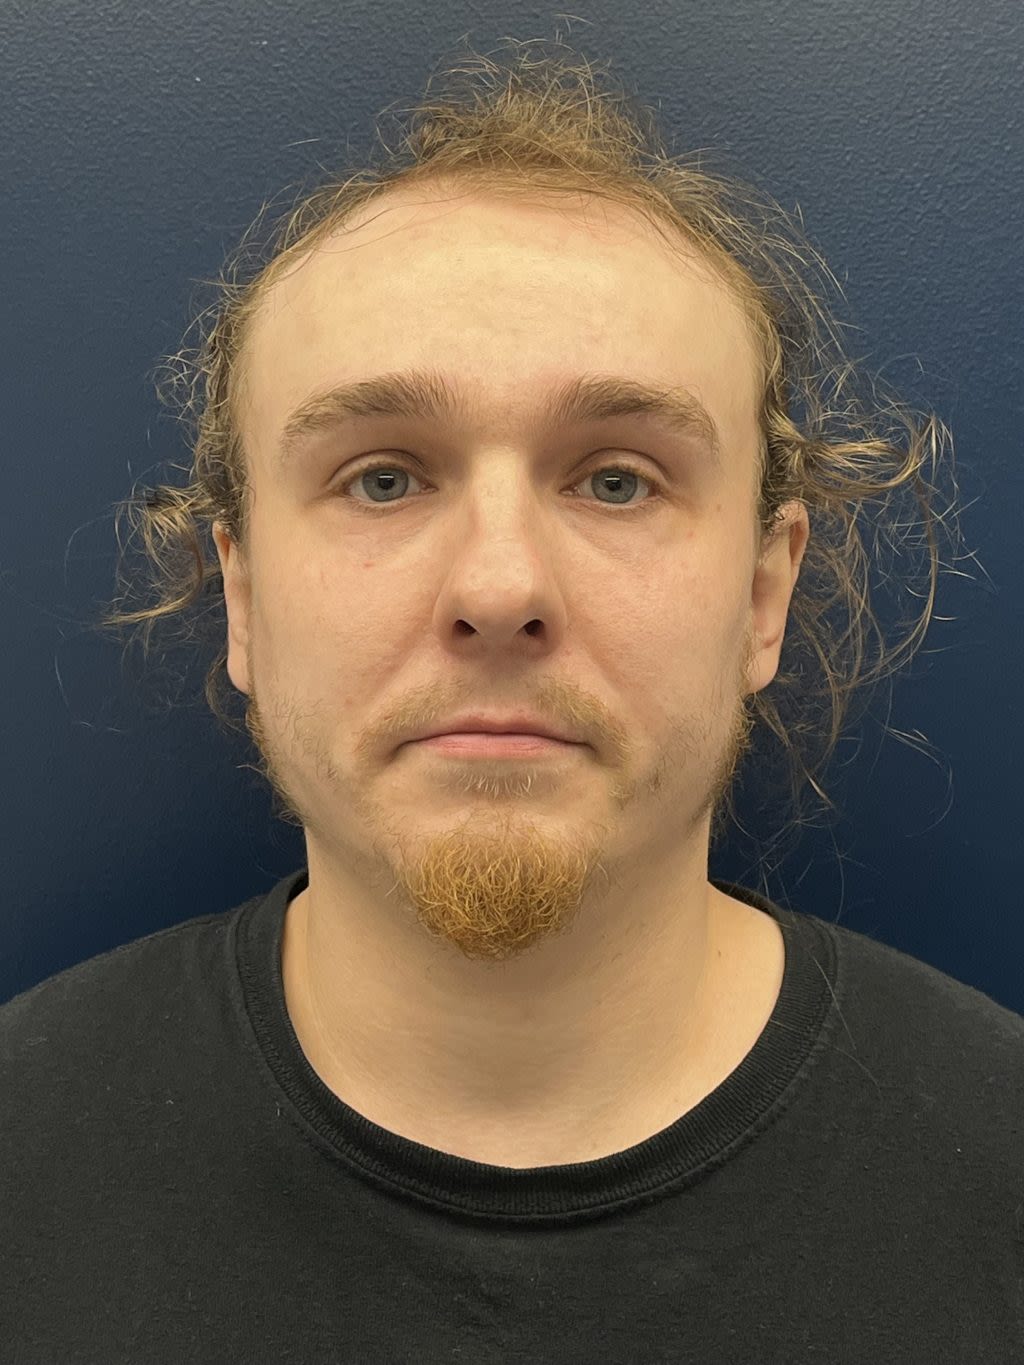 Maine man released after speeding over 120 mph, initiating police pursuit in New Hampshire